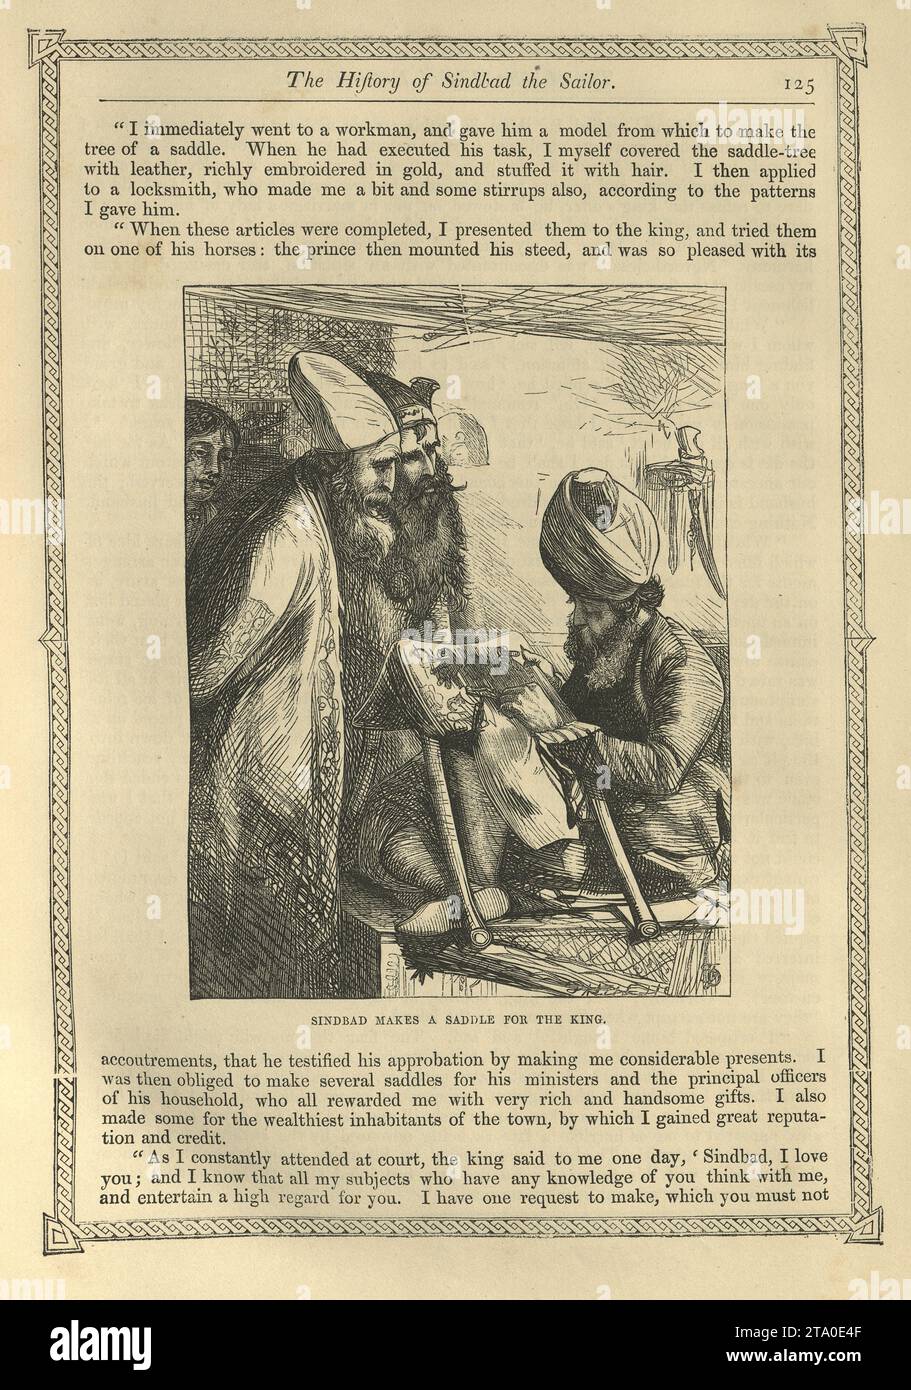 Vintage illustration One Thousand and One Nights, Sinbad the Sailor makes a saddle for the king, Arabian, Middle Eastern folktales, by The Brothers Dalziel. Stock Photo